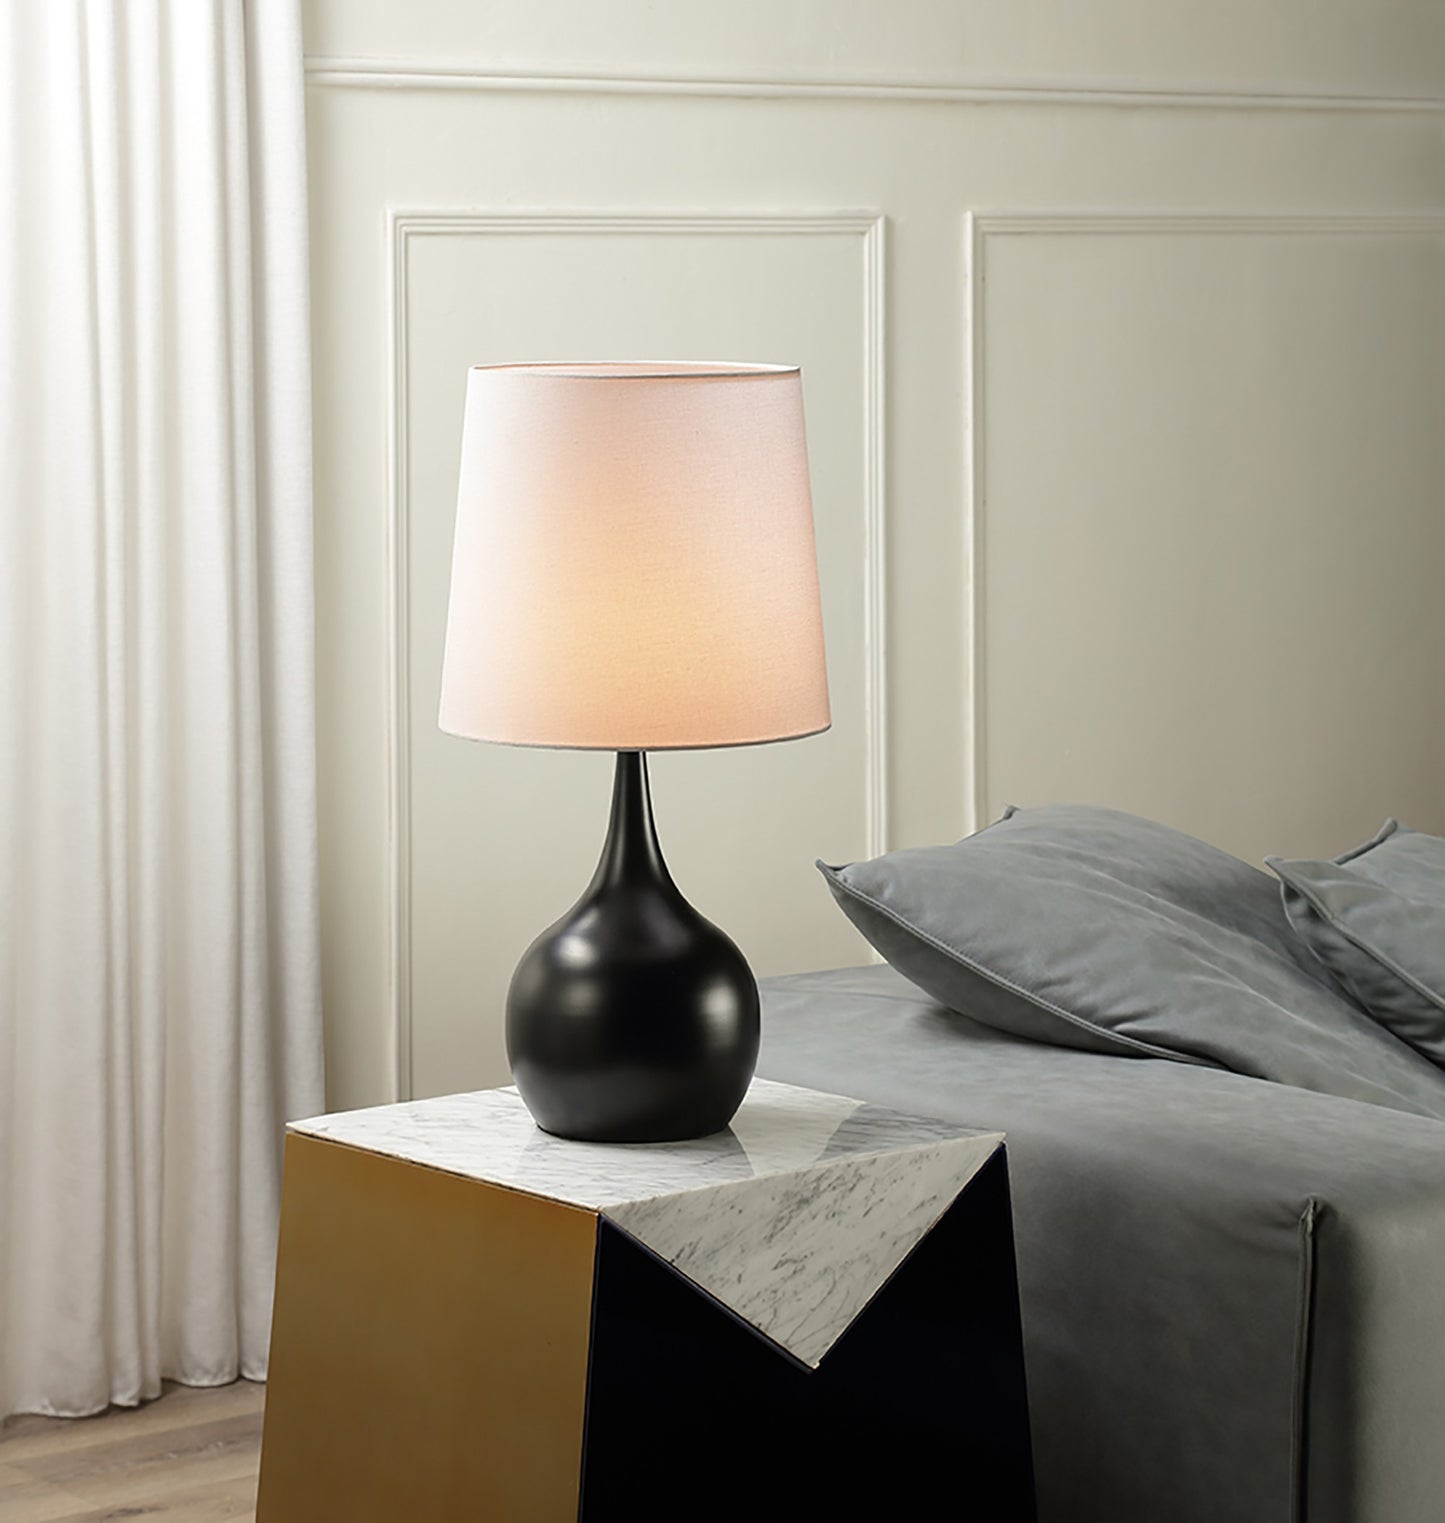 24" Black Metal Bedside Table Lamp With White Shade